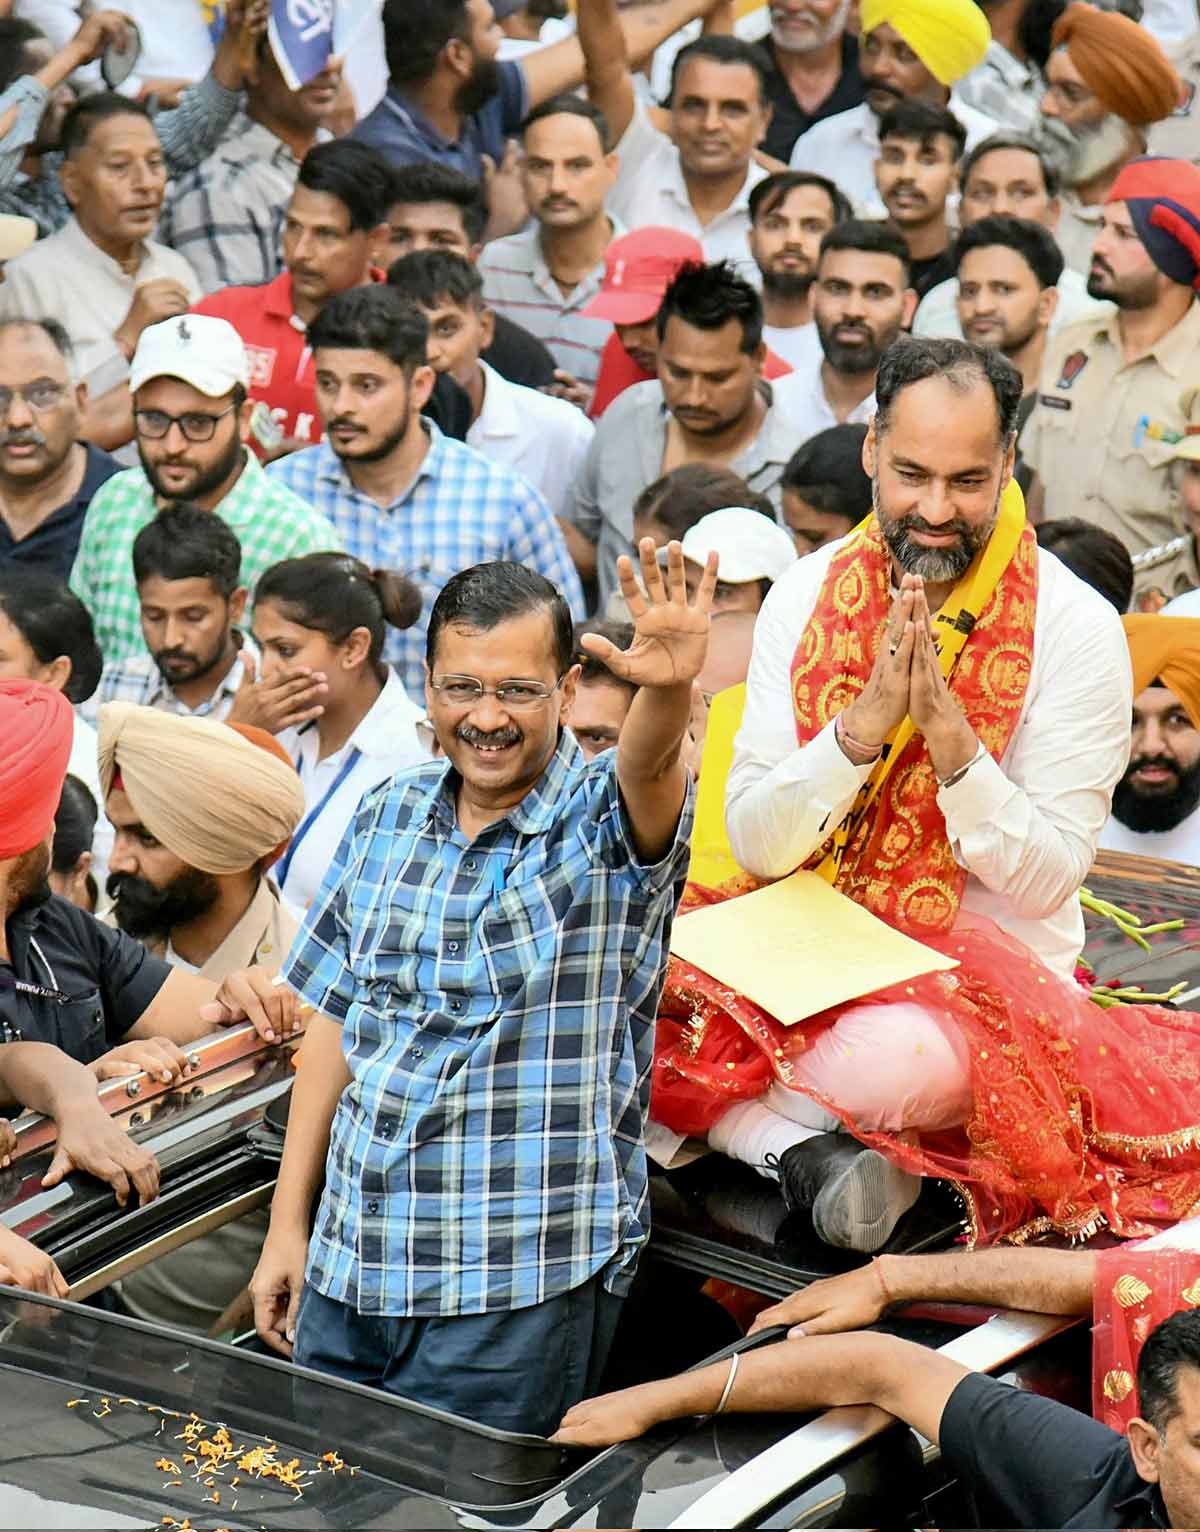 Delhi Chief Minister holds a road show in Jalandhar